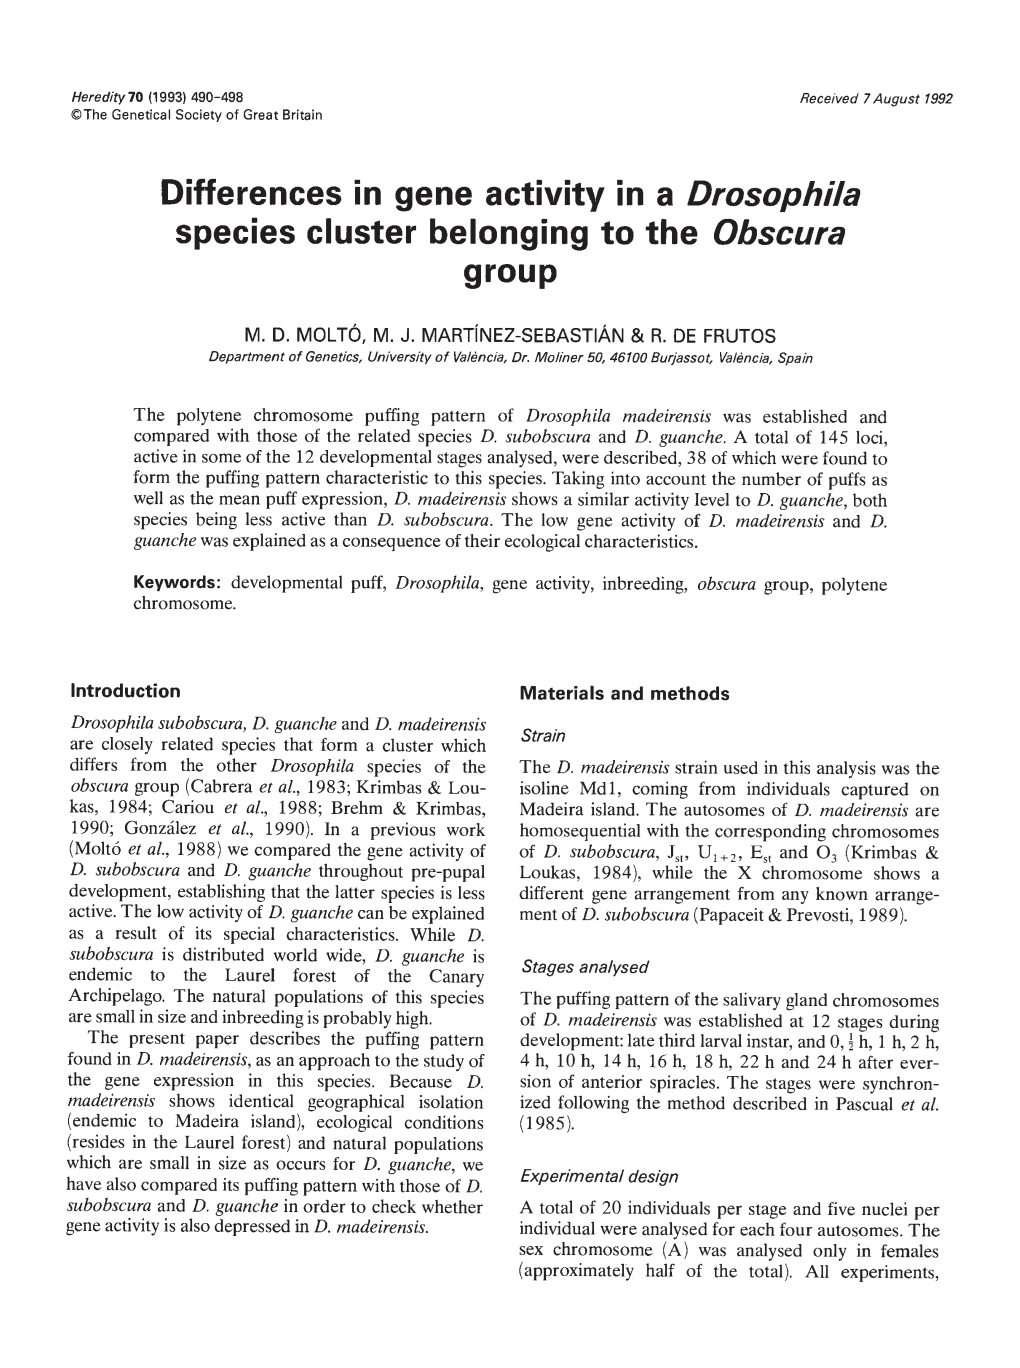 Differences in Gene Activity in a Drosophila Species Cluster Belonging to the Obscura Group